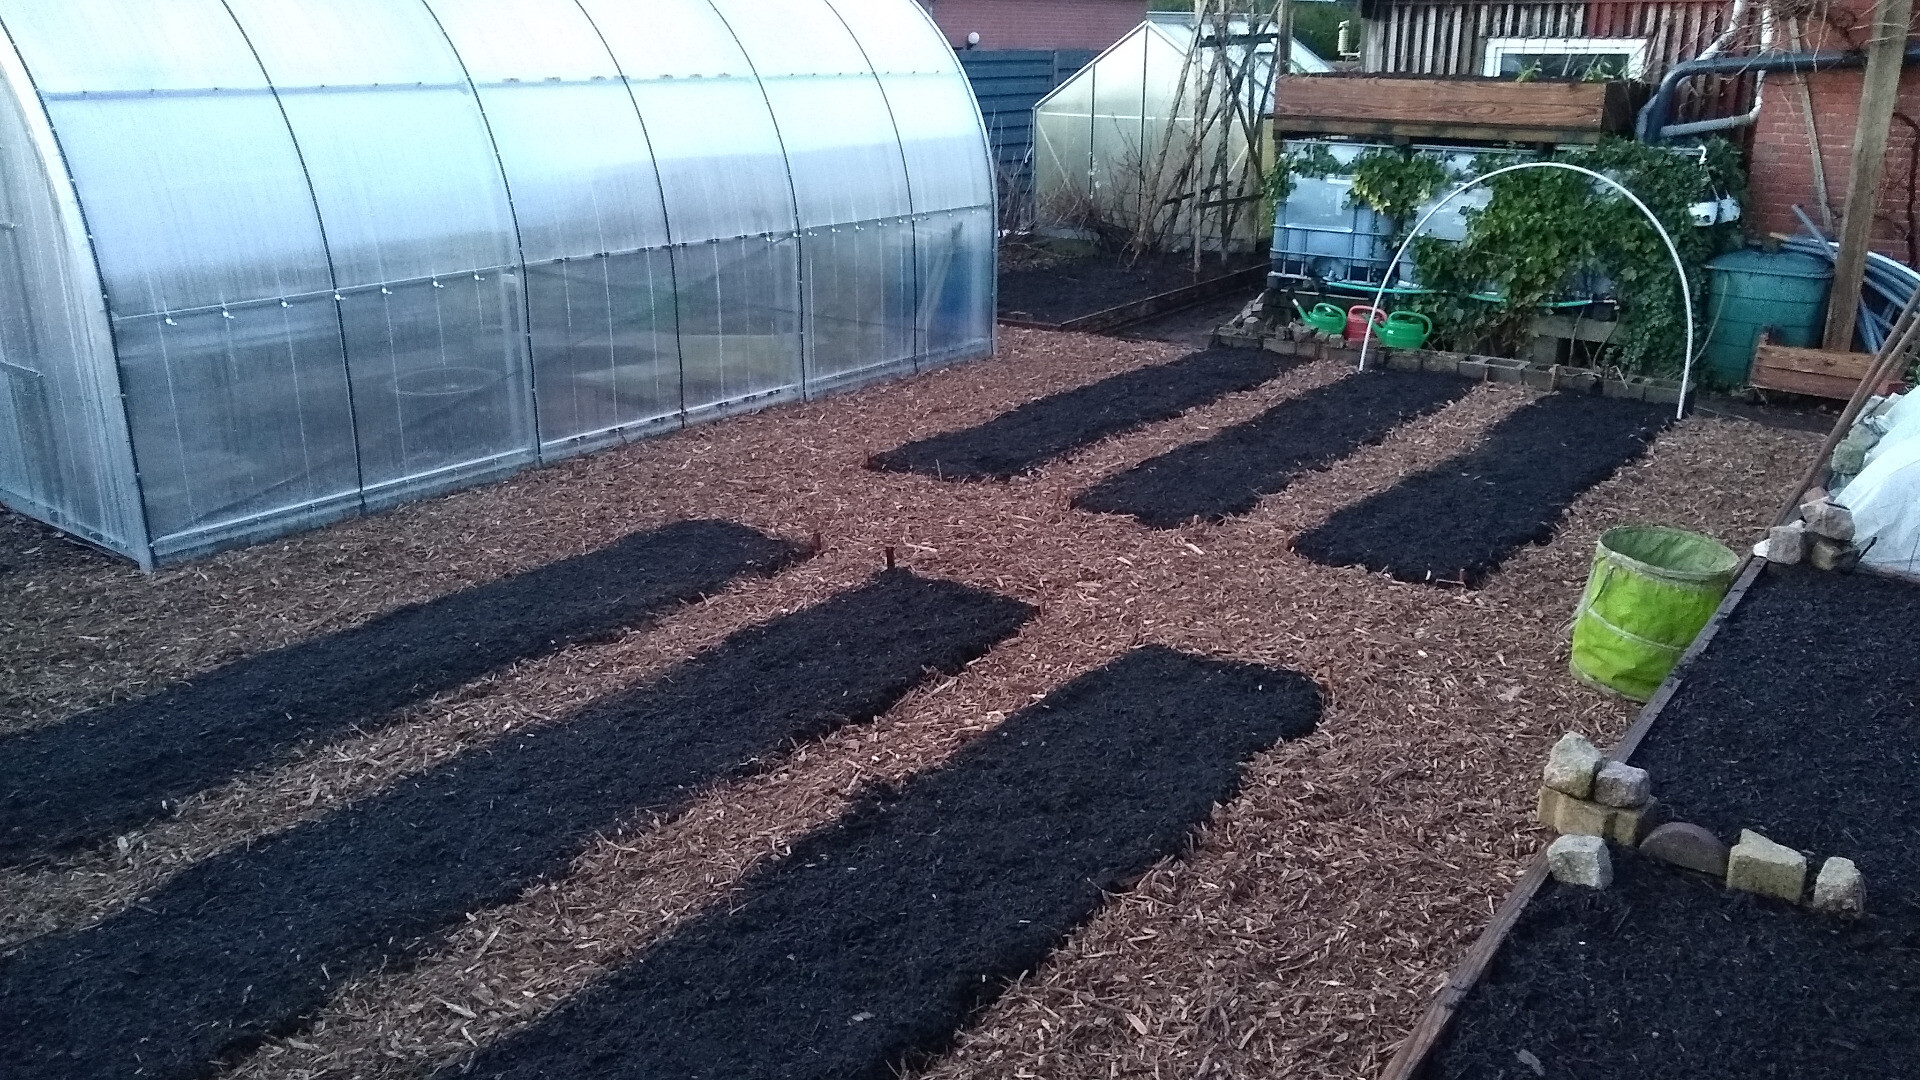 Nodig beds with fresh compost and woodchips as paths